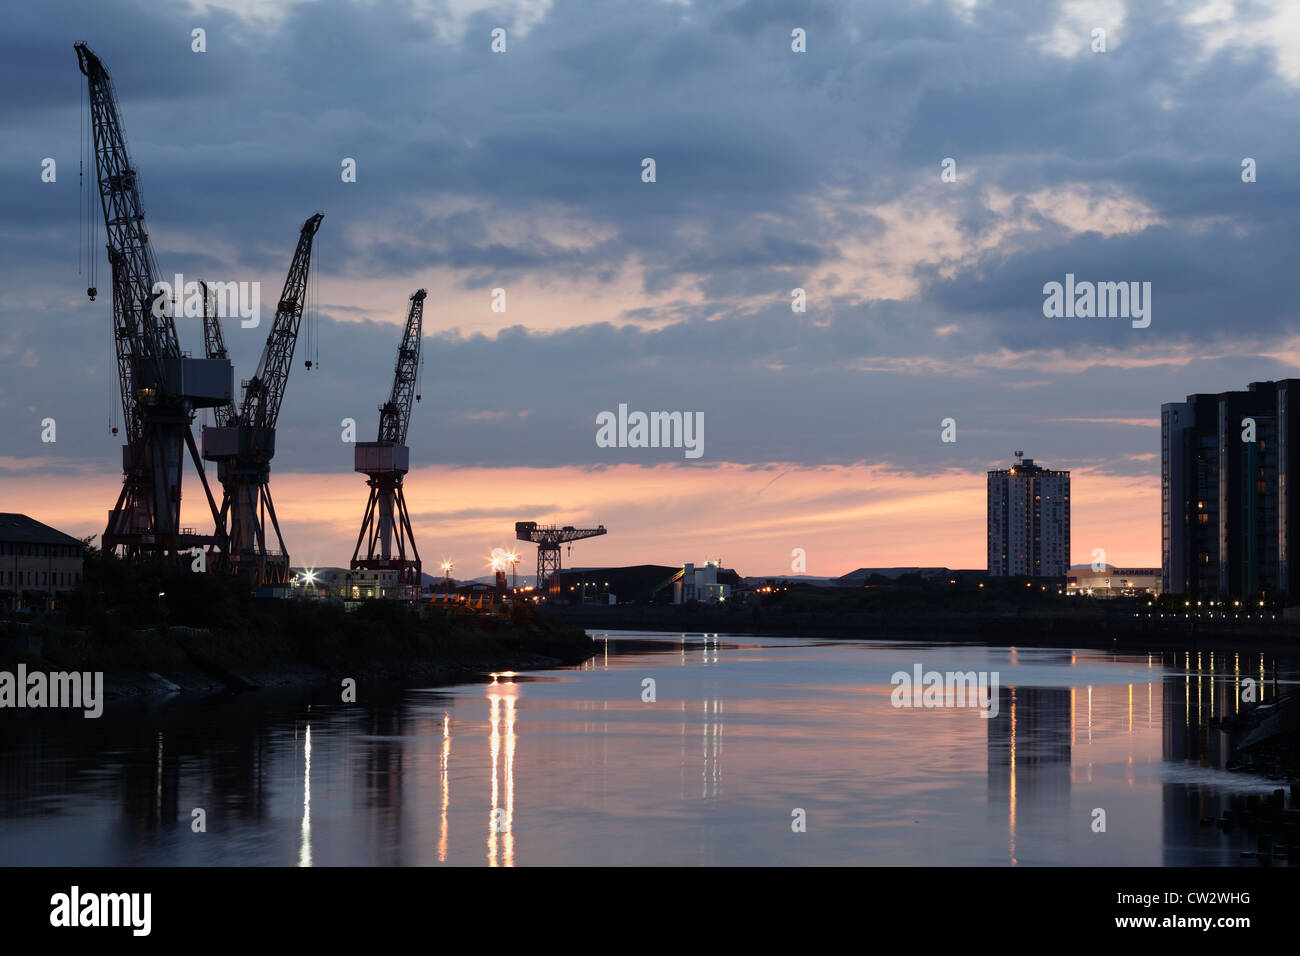 Sunset over the cranes at BAE Systems Shipyard beside the River Clyde in Govan, Glasgow, Scotland, UK Stock Photo